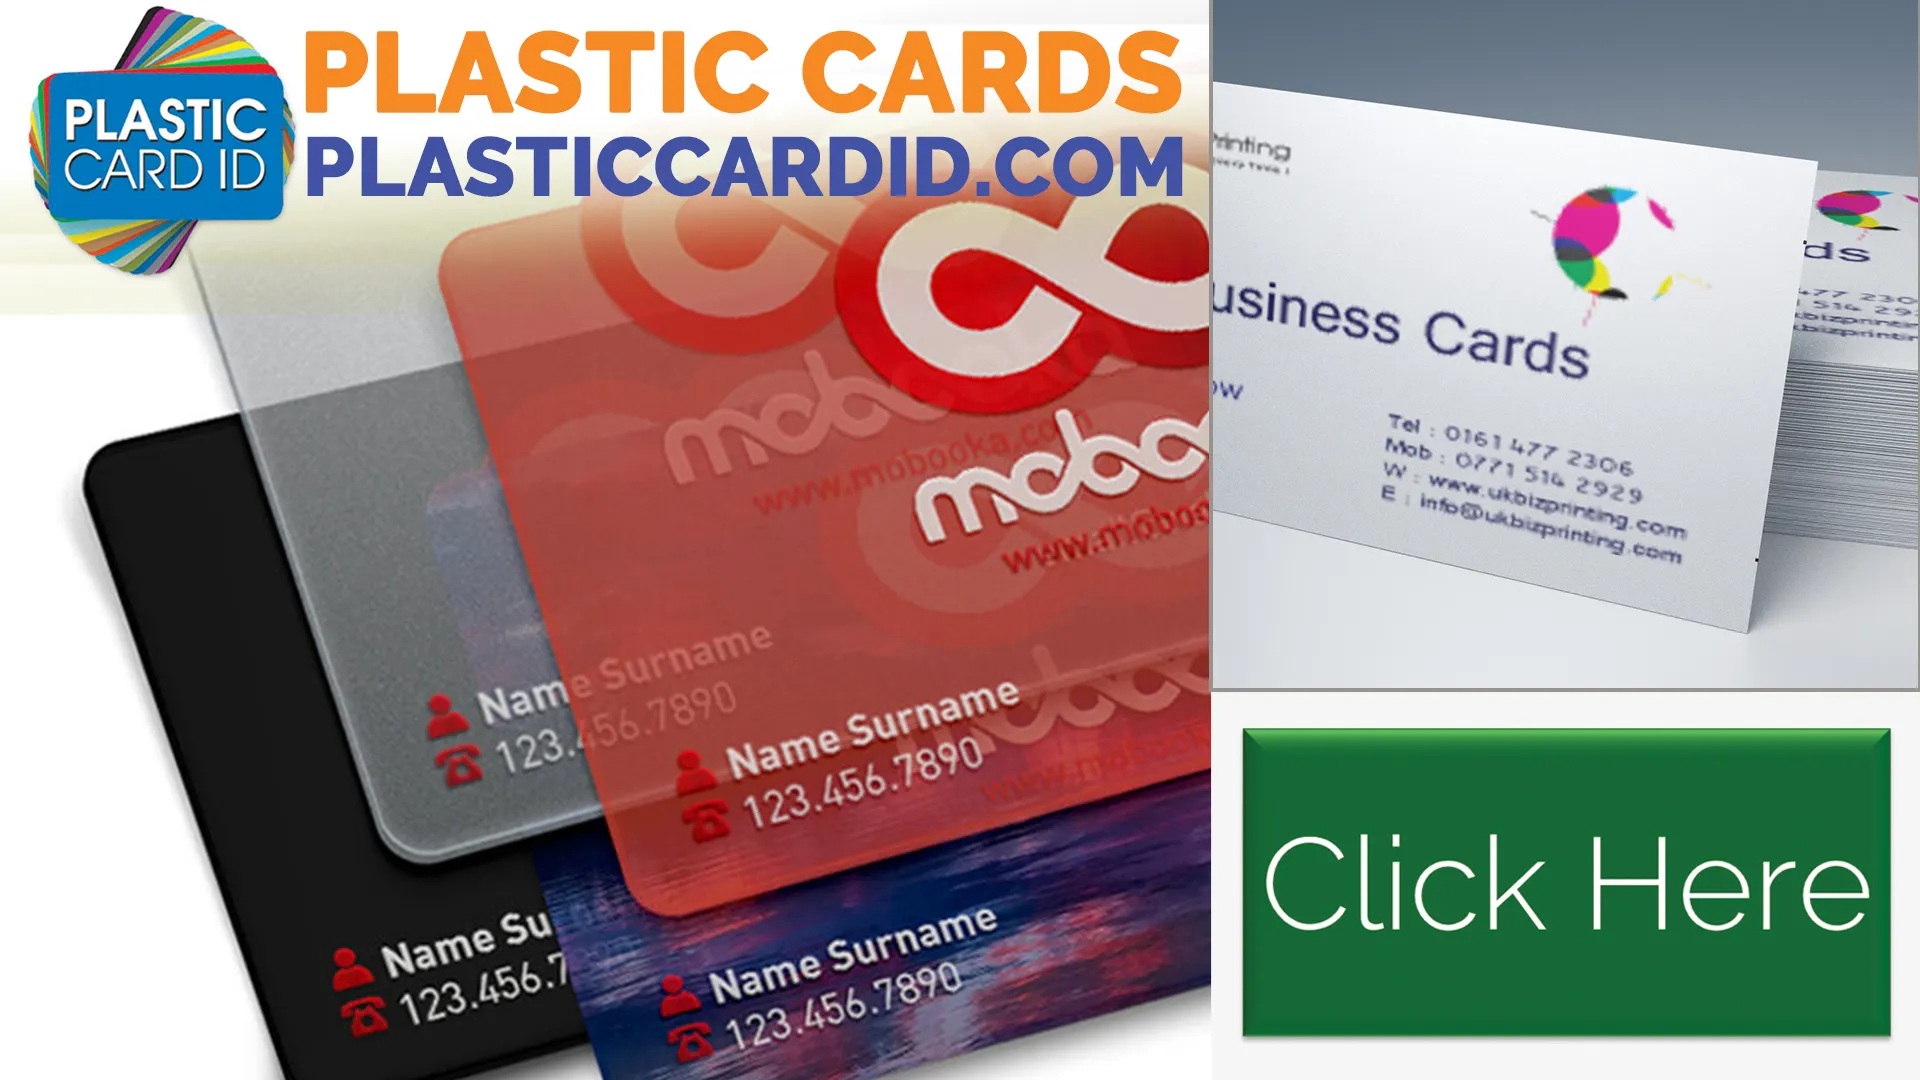 A Deep Dive into Our Range of Plastic Cards